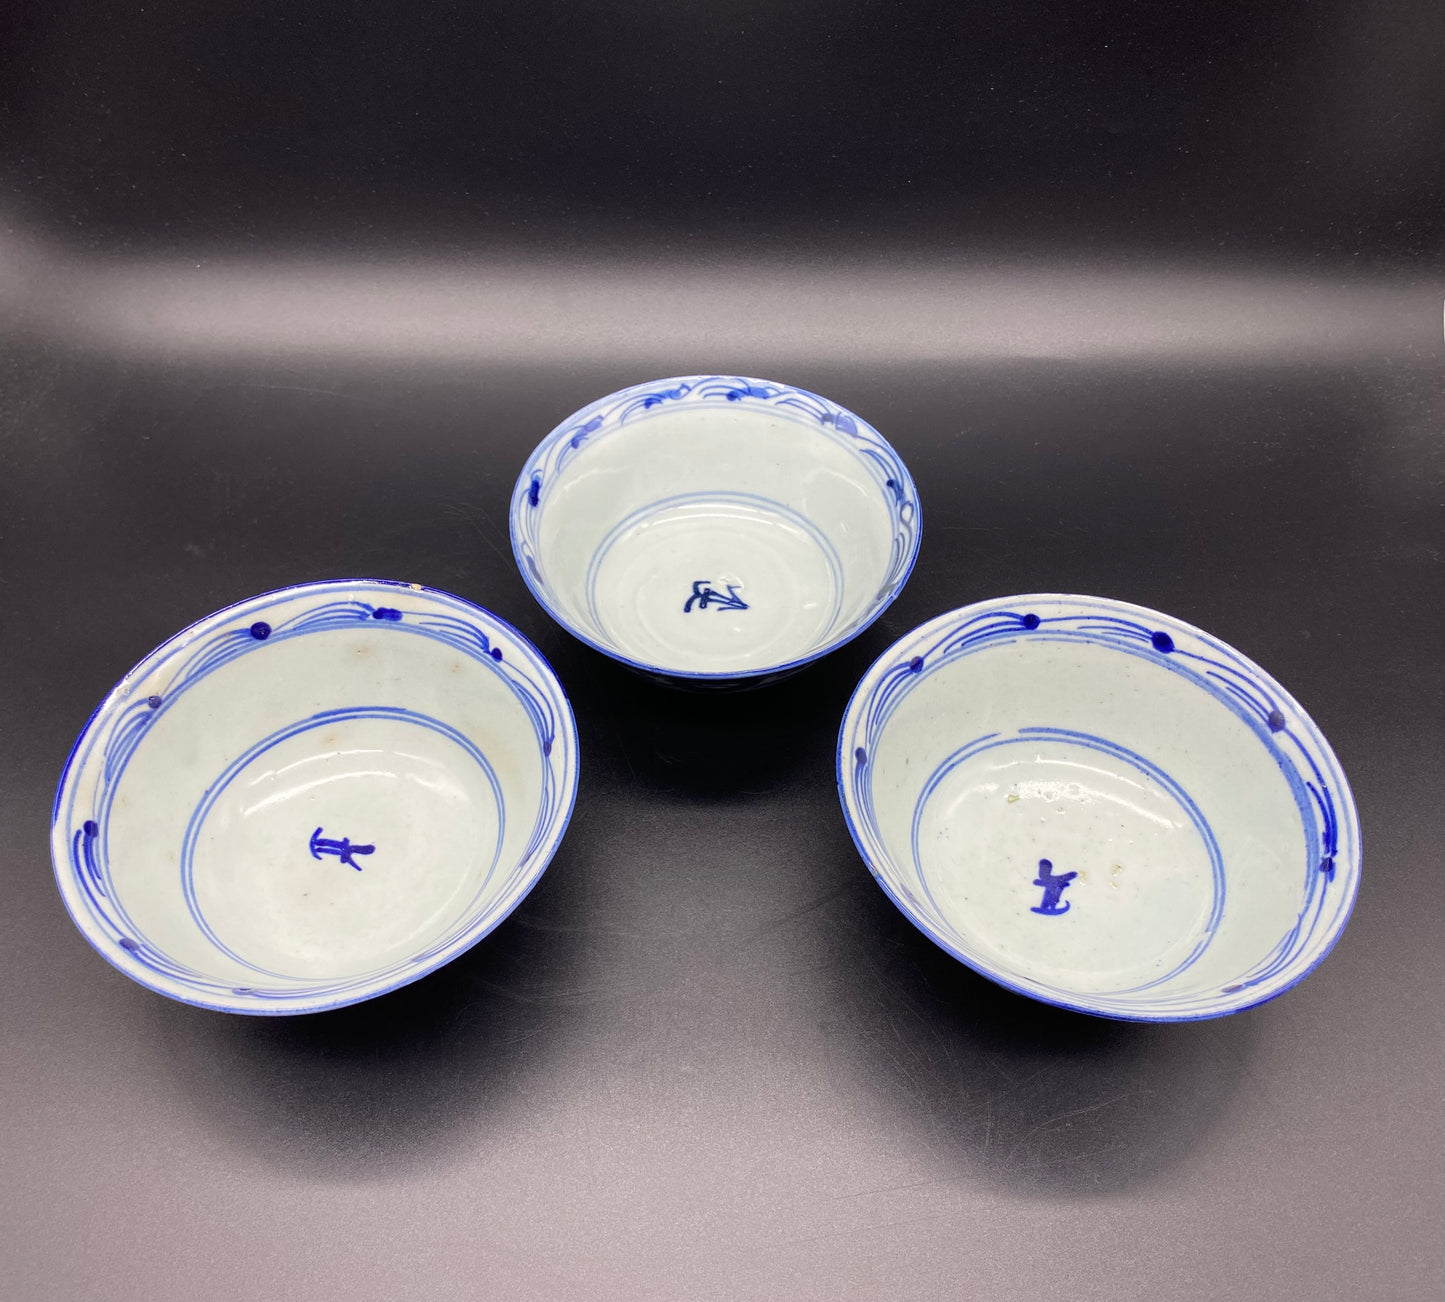 Antiques & Collectables Online - Three Chinese Provencal Blue & White Qing Porcelain Bowls 18th Century 